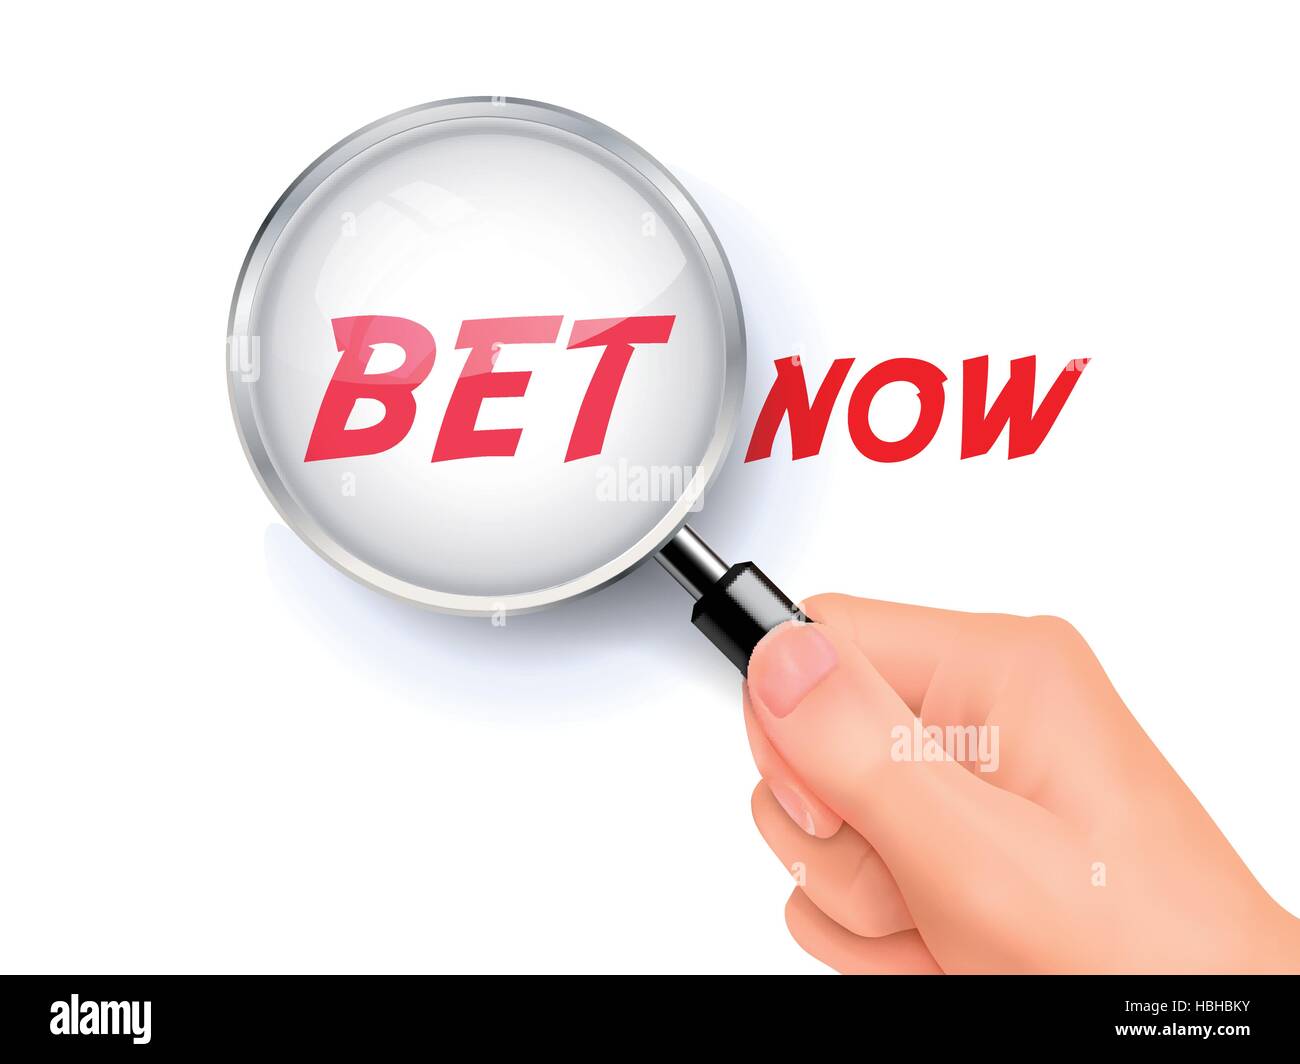 bet now showing through magnifying glass held by hand Stock Vector